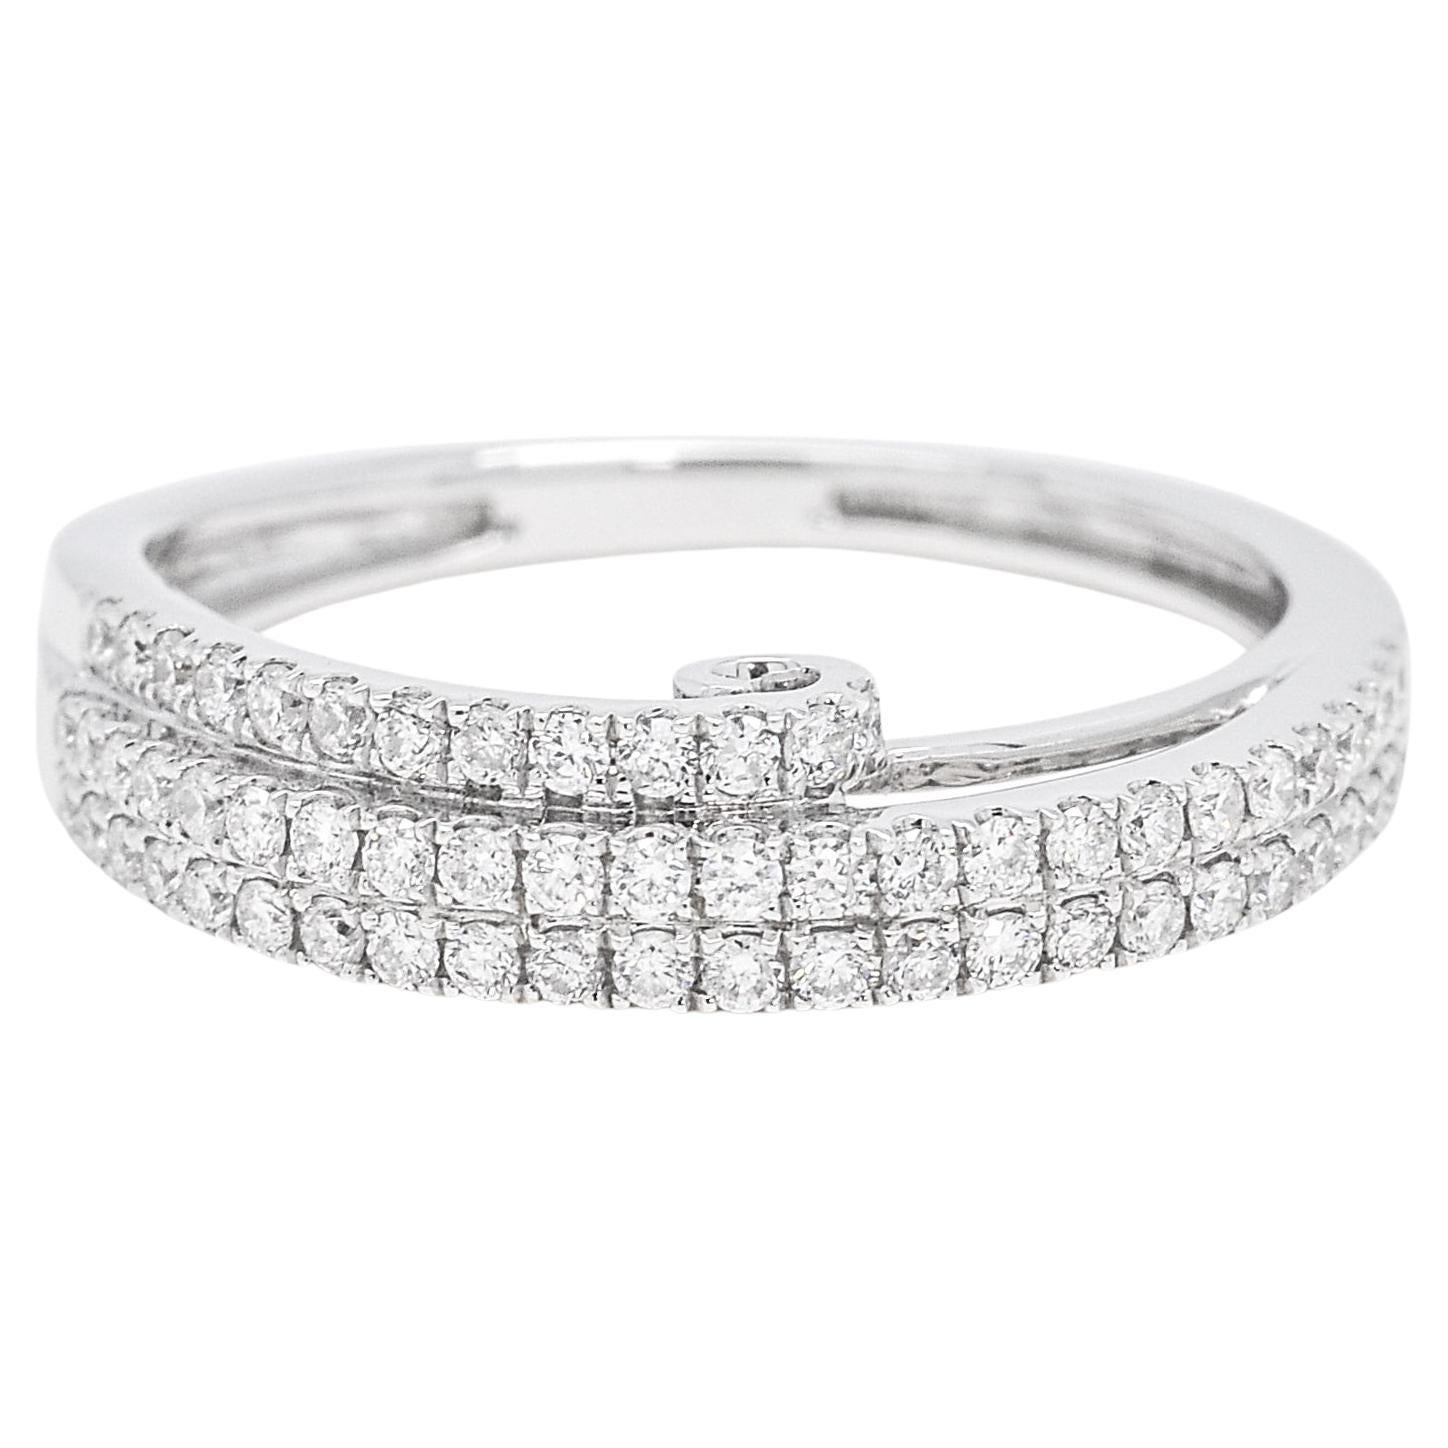 For Sale:  Natural Diamond Band, 18kt White Gold Double Row Half Eternity Band Ring